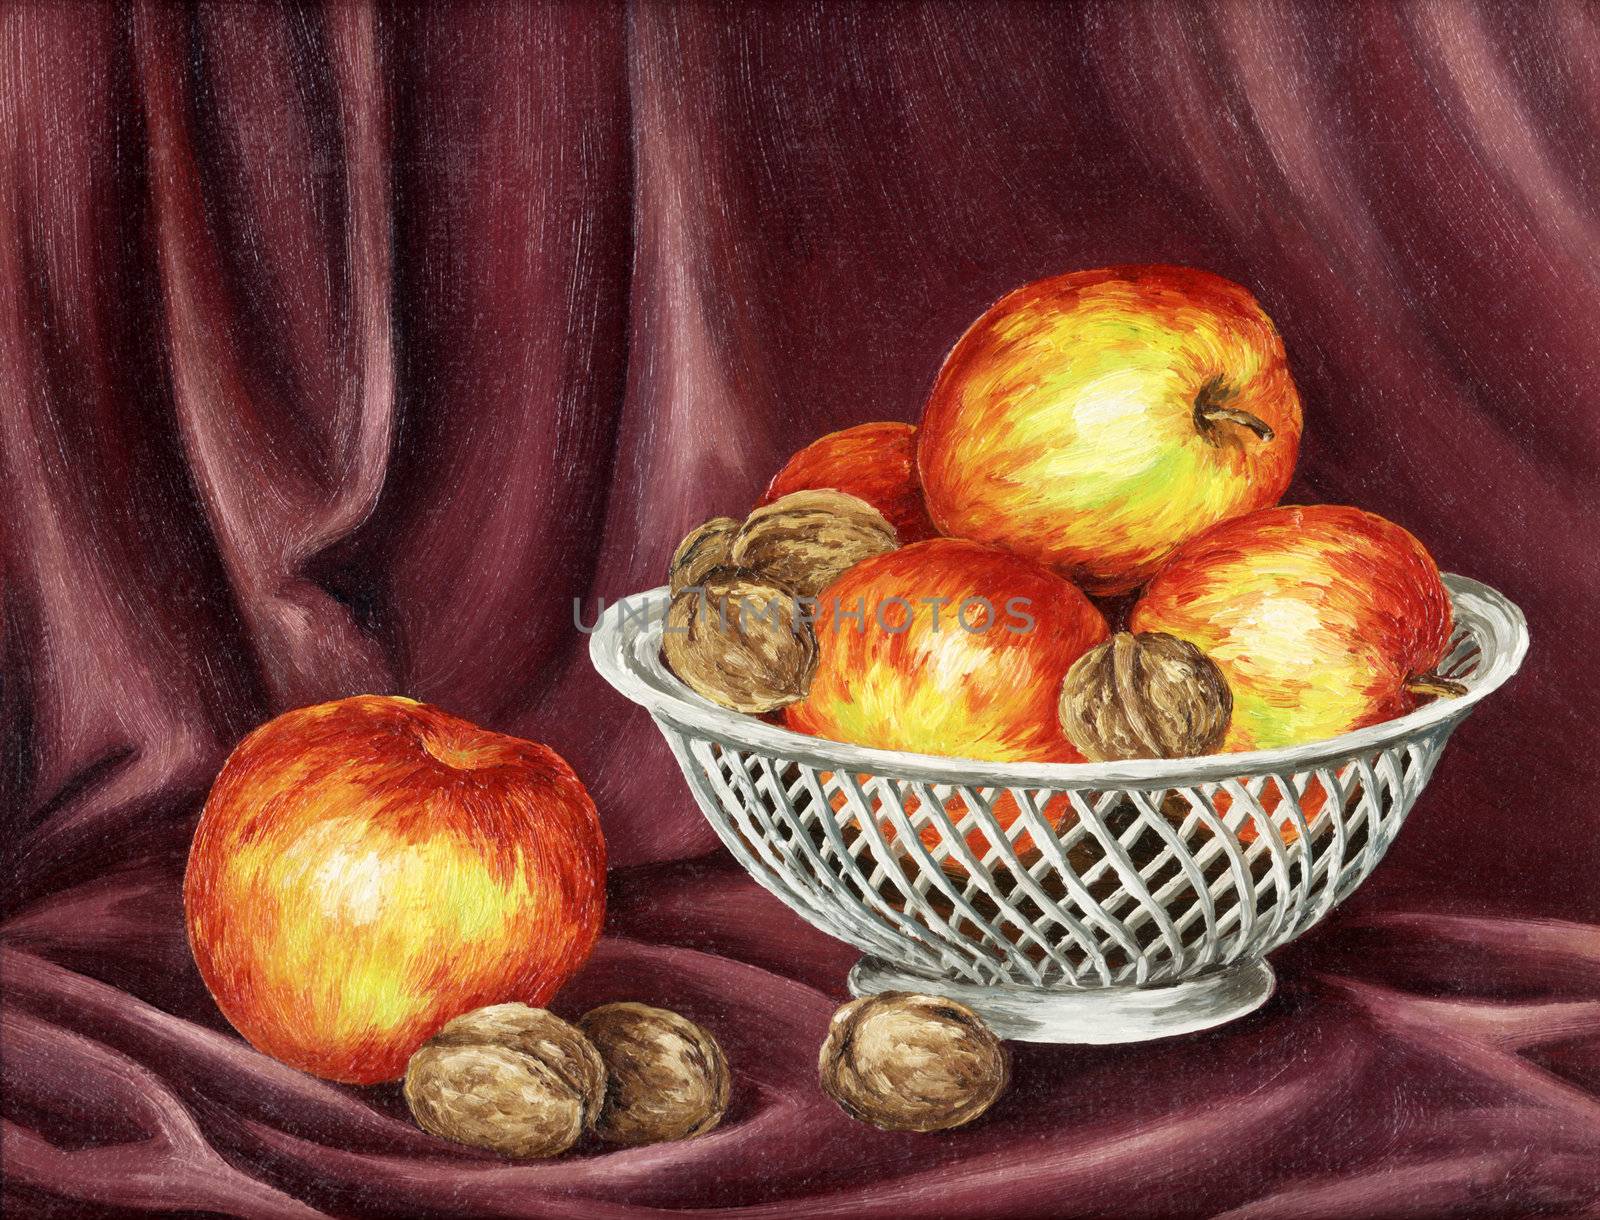 Apples and nuts on a red by alexcoolok